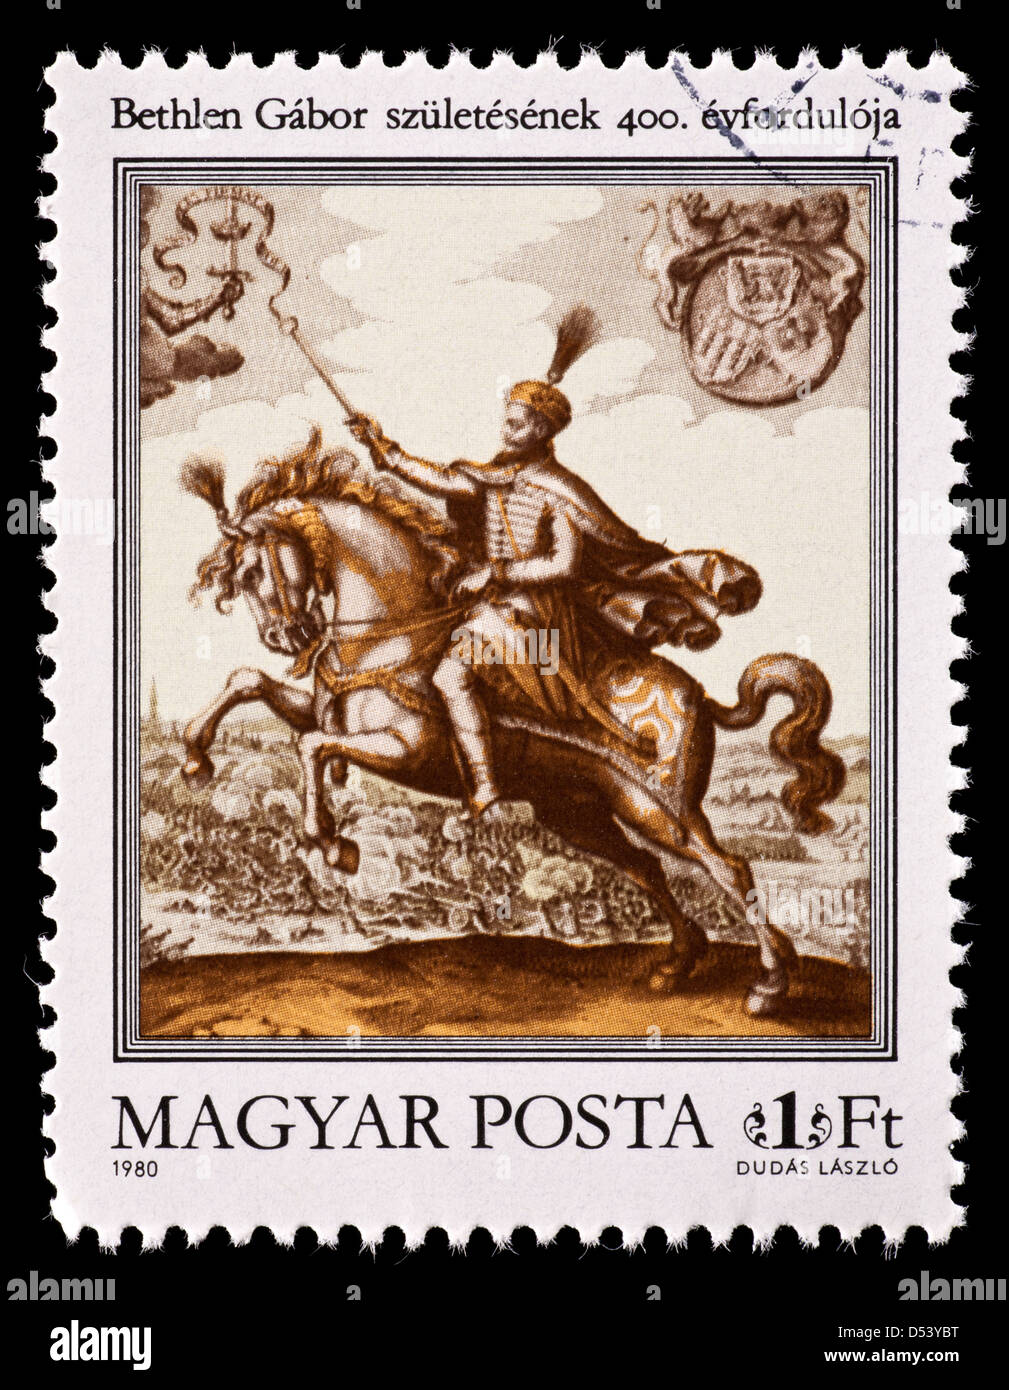 Postage stamp from Hungary depicting Gabor Bethlen, copperplate print. Stock Photo